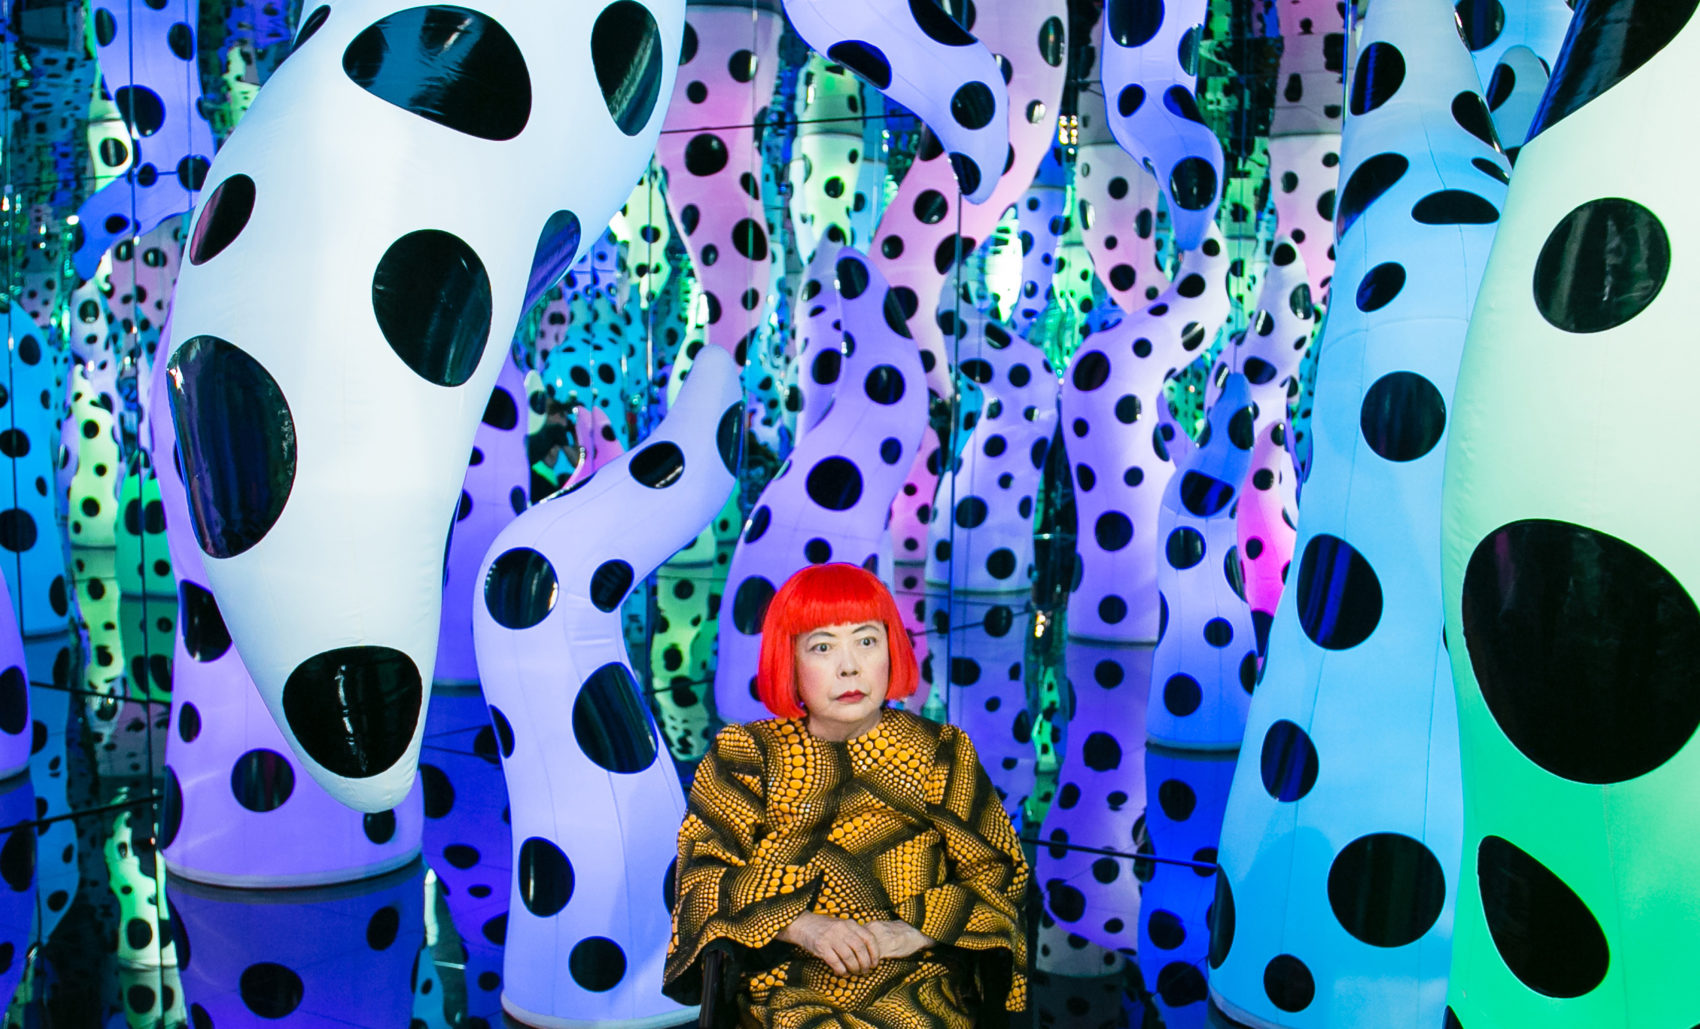 Yayoi Kusama pictured with her work &quot;Love Is Calling,&quot; during her solo exhibition &quot;I Who Have Arrived In Heaven&quot; at David Zwirner, New York in 2013. (Courtesy David Zwirner, New York; Ota Fine Arts, Tokyo/Singapore/Shanghai; Victoria Miro, London/Venice)